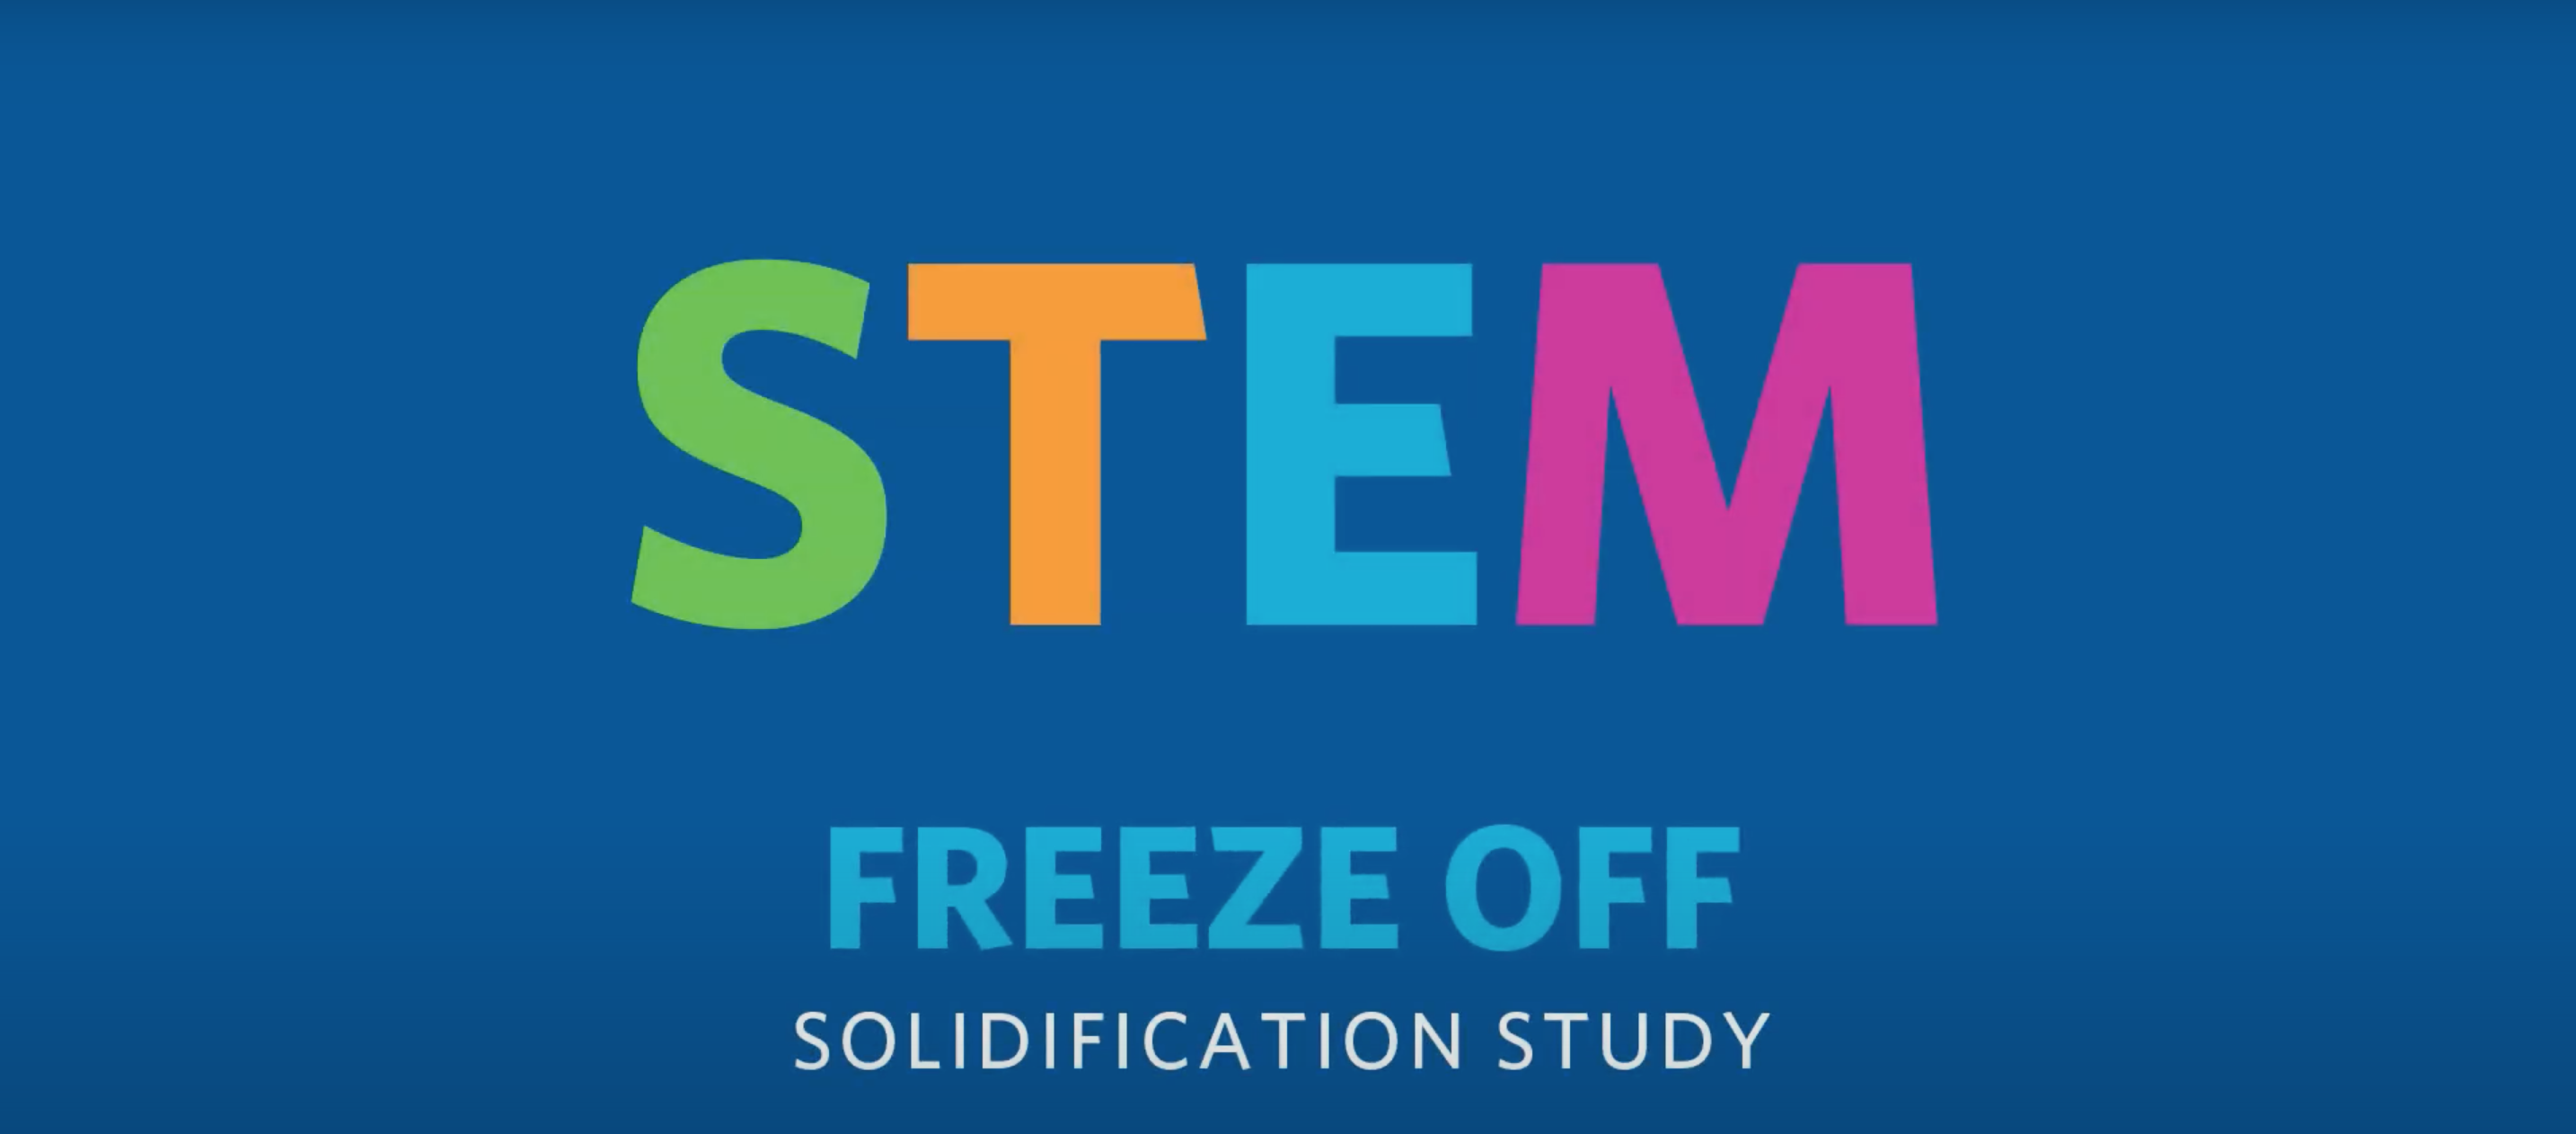 Text STEM Freeze off solidification study